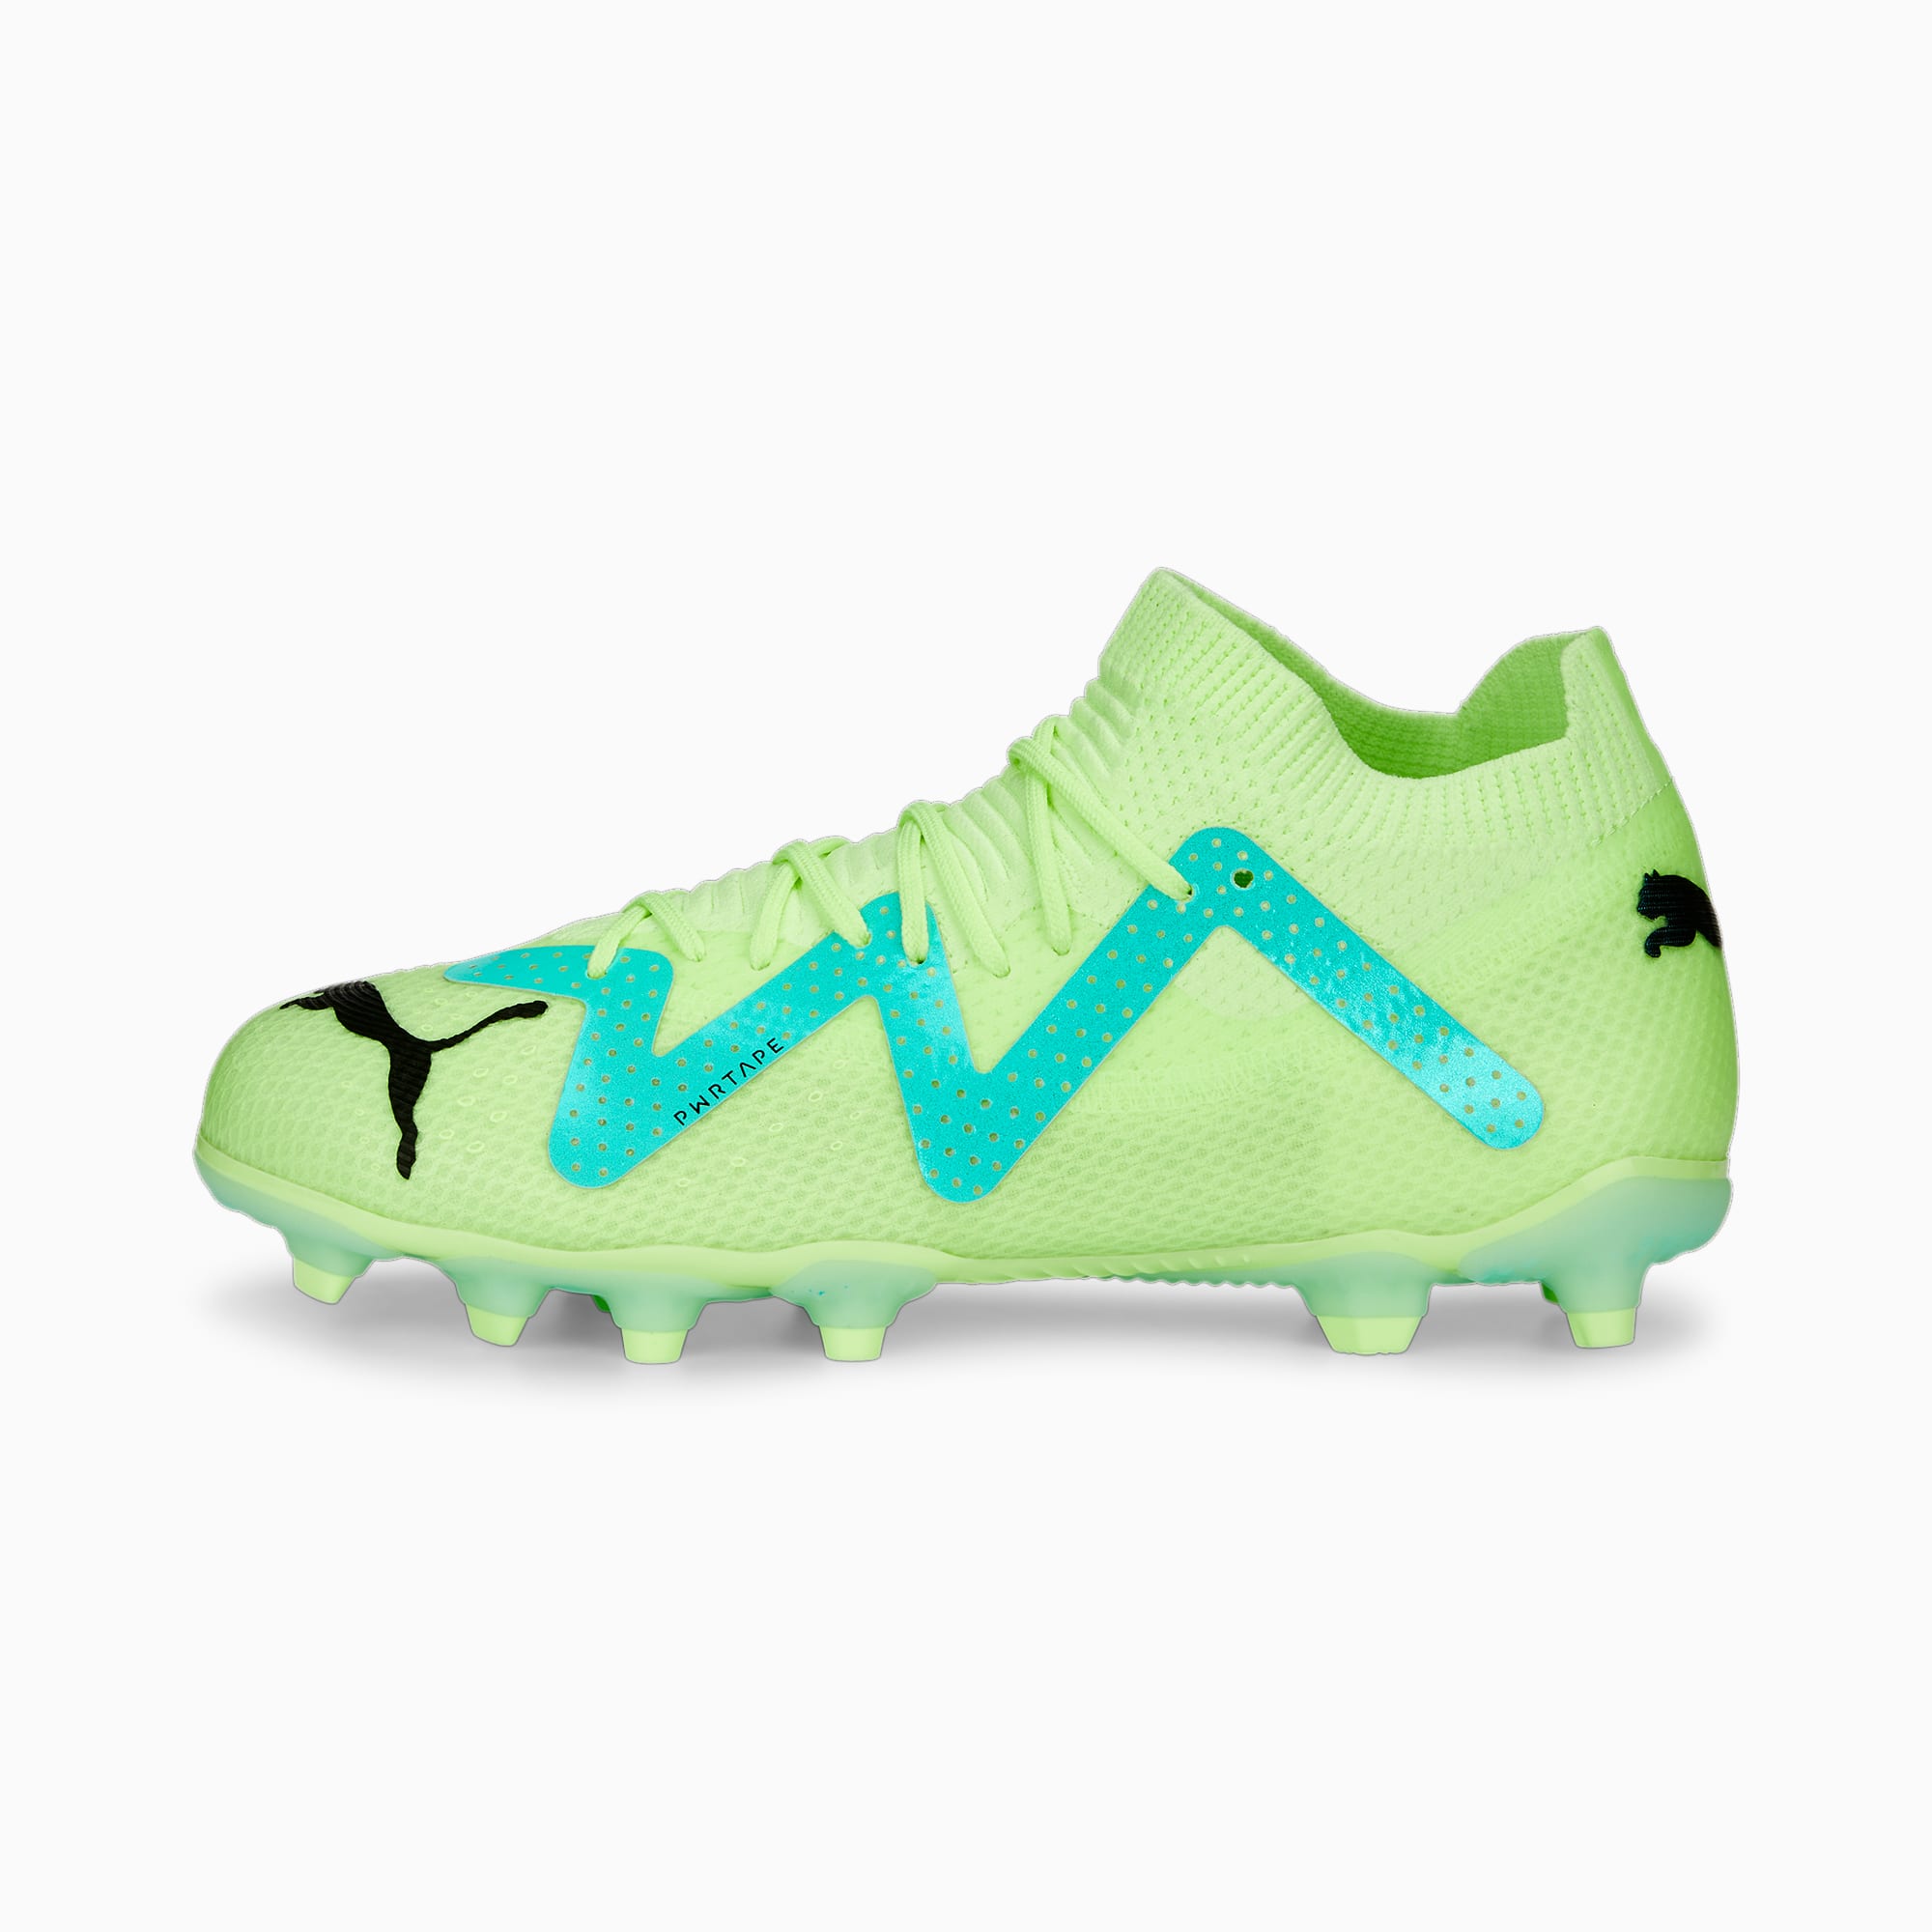 Chaussures de Football professionnelles crampons football homme Tf